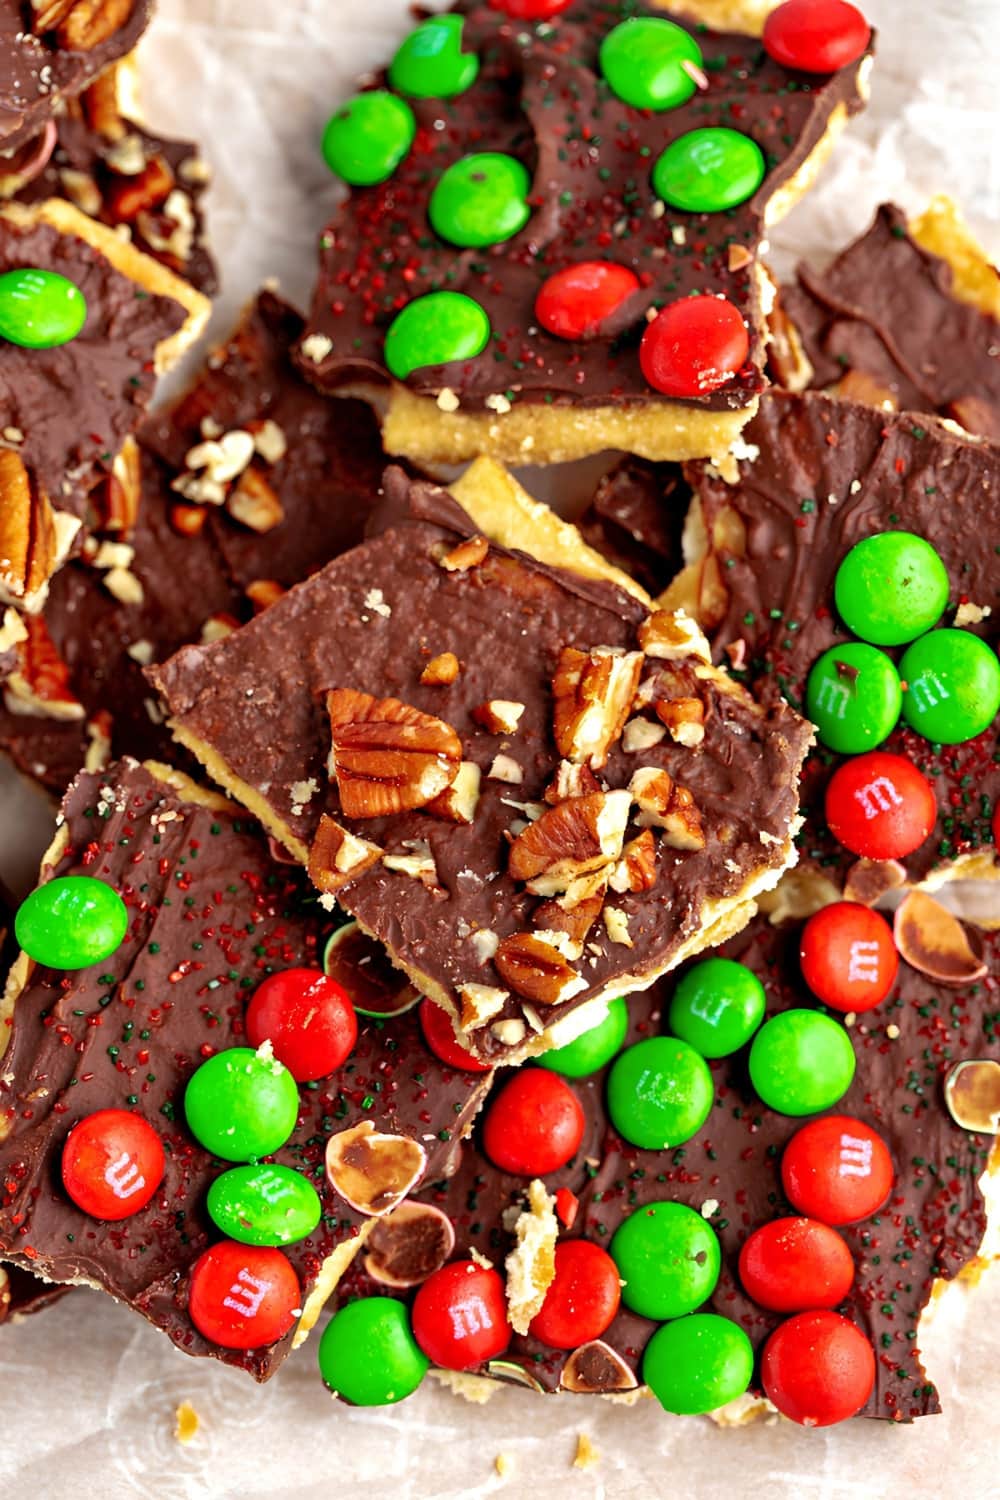 Stacks of Sweet Christmas Cracks Topped with M&M's Candies